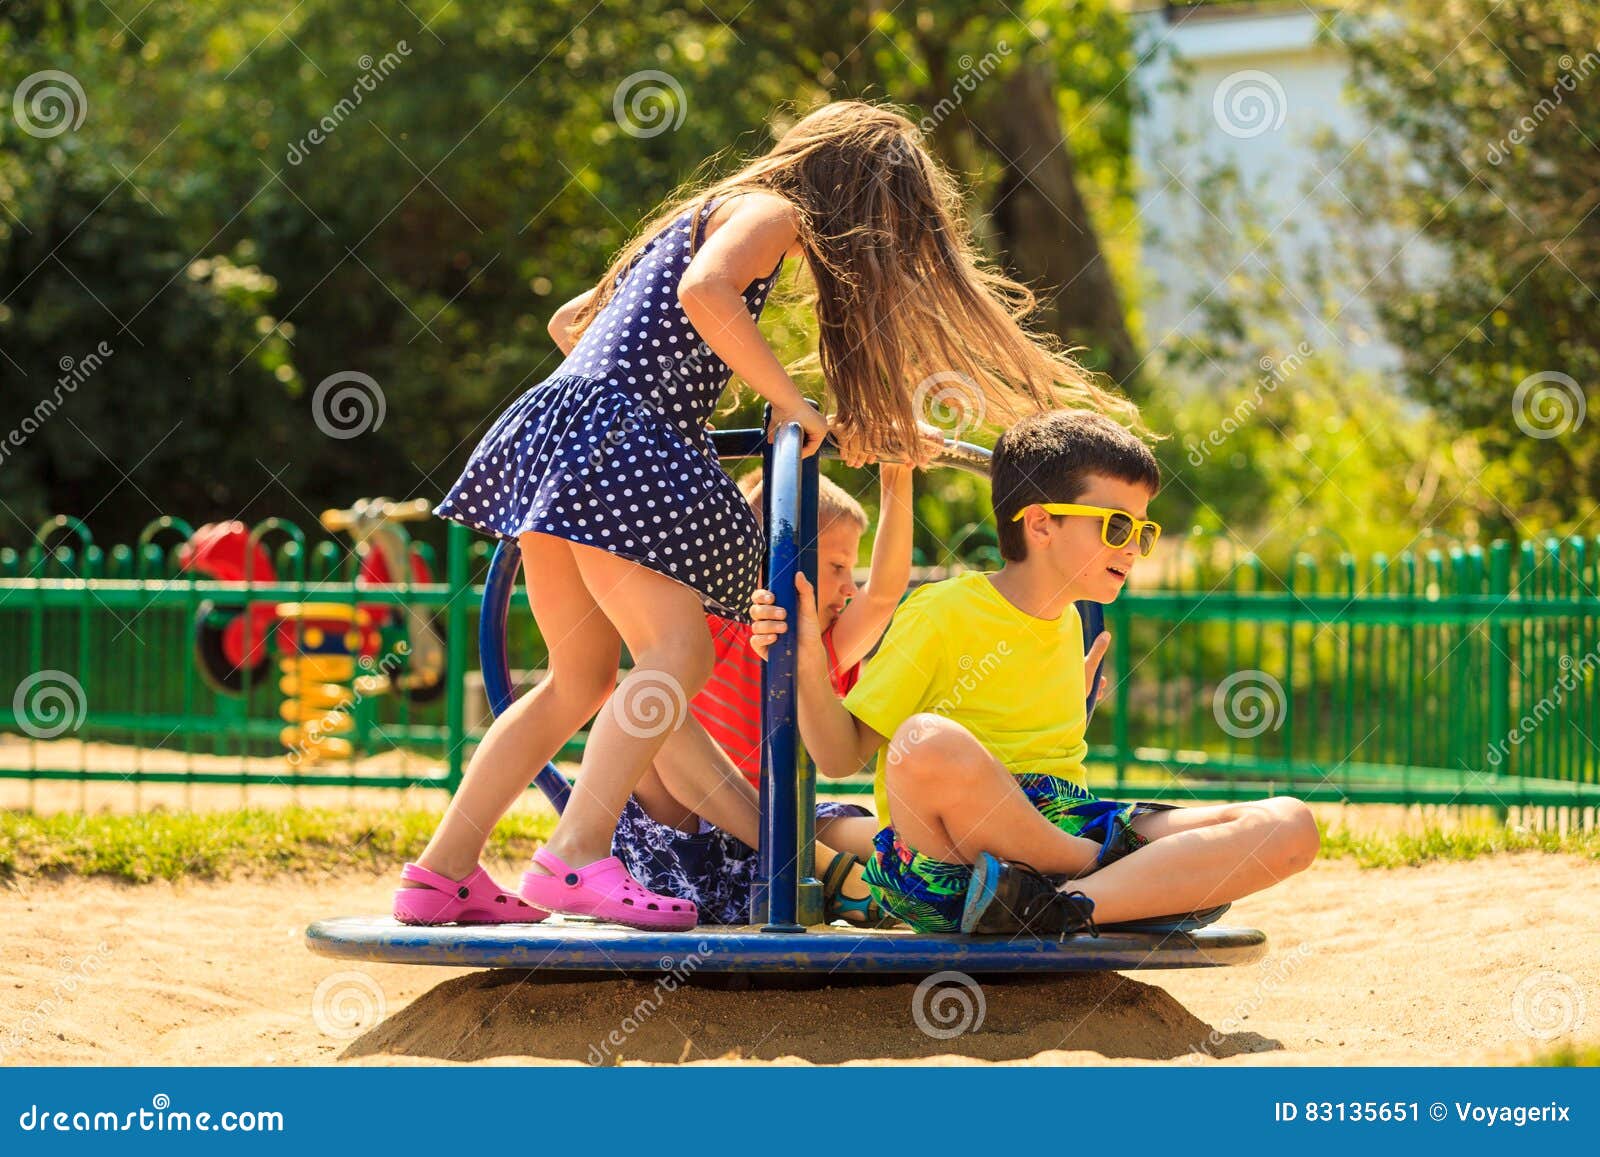 Kids Having Fun On Playground Stock Image Image Of Playing Young